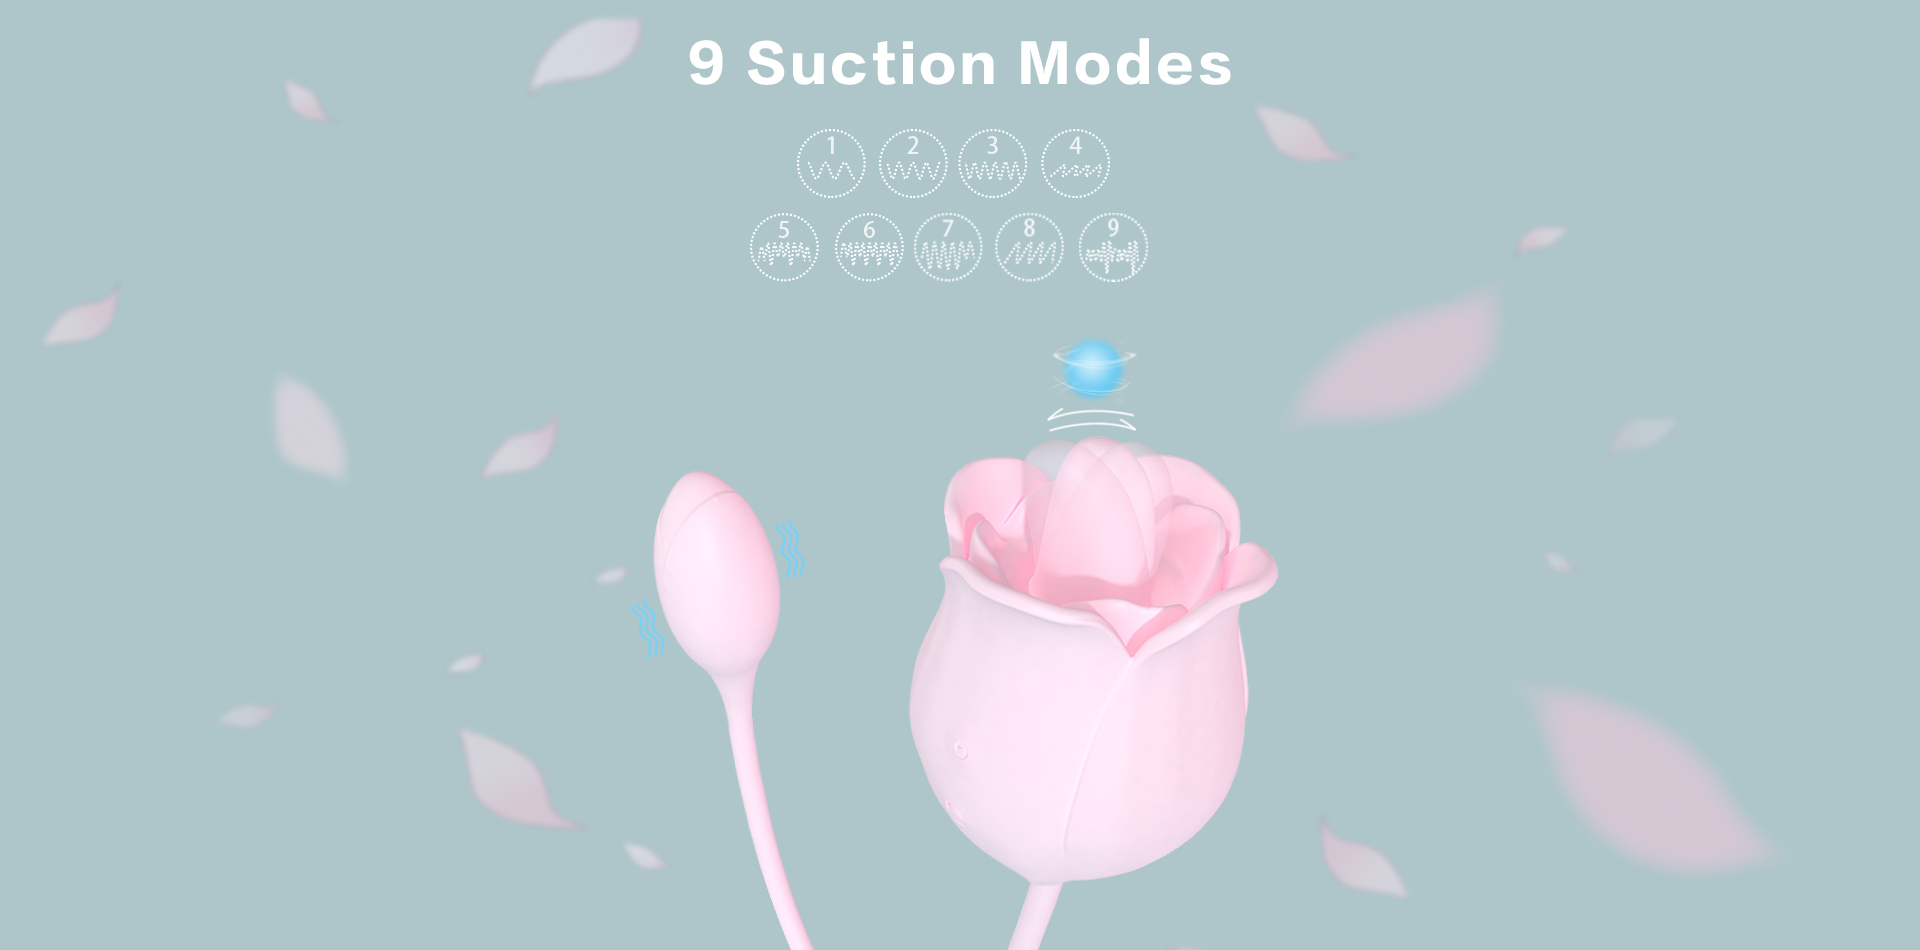 Rose vibrator tongue licking  nipple sucker rose sex toy oral licking stimulate masturbate adult toys massager For Women-05